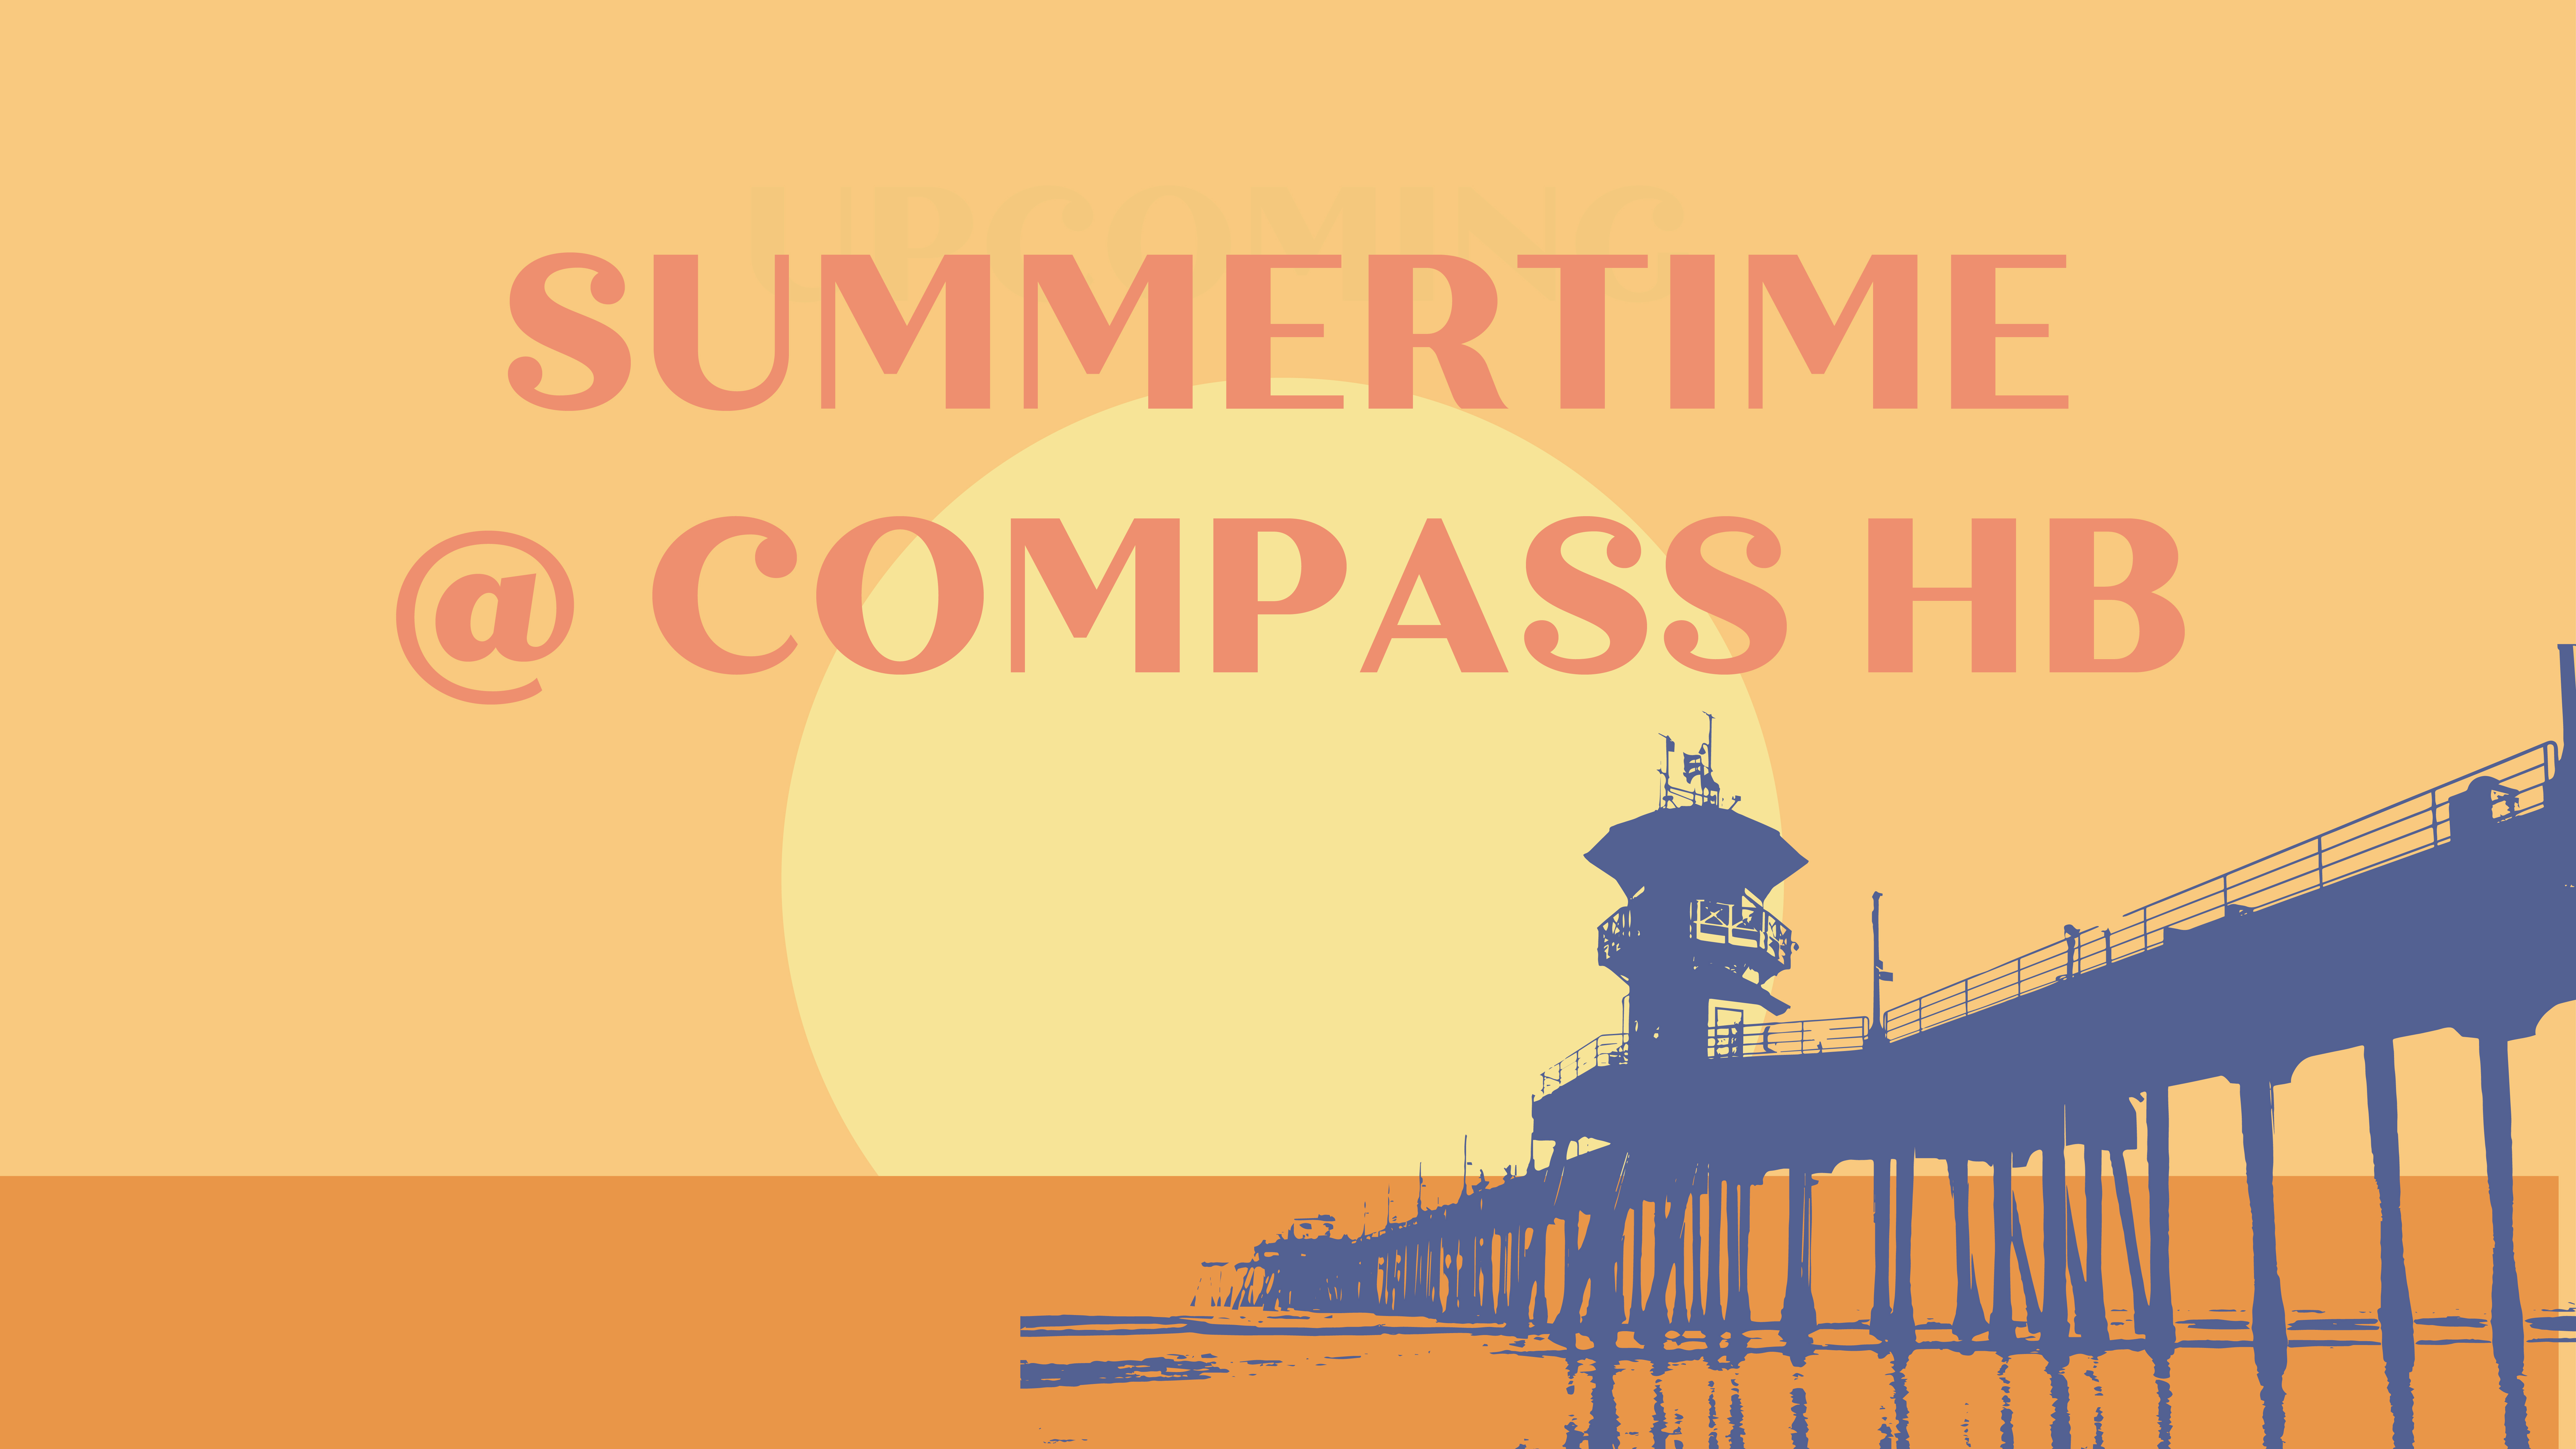 summertime at compass hb